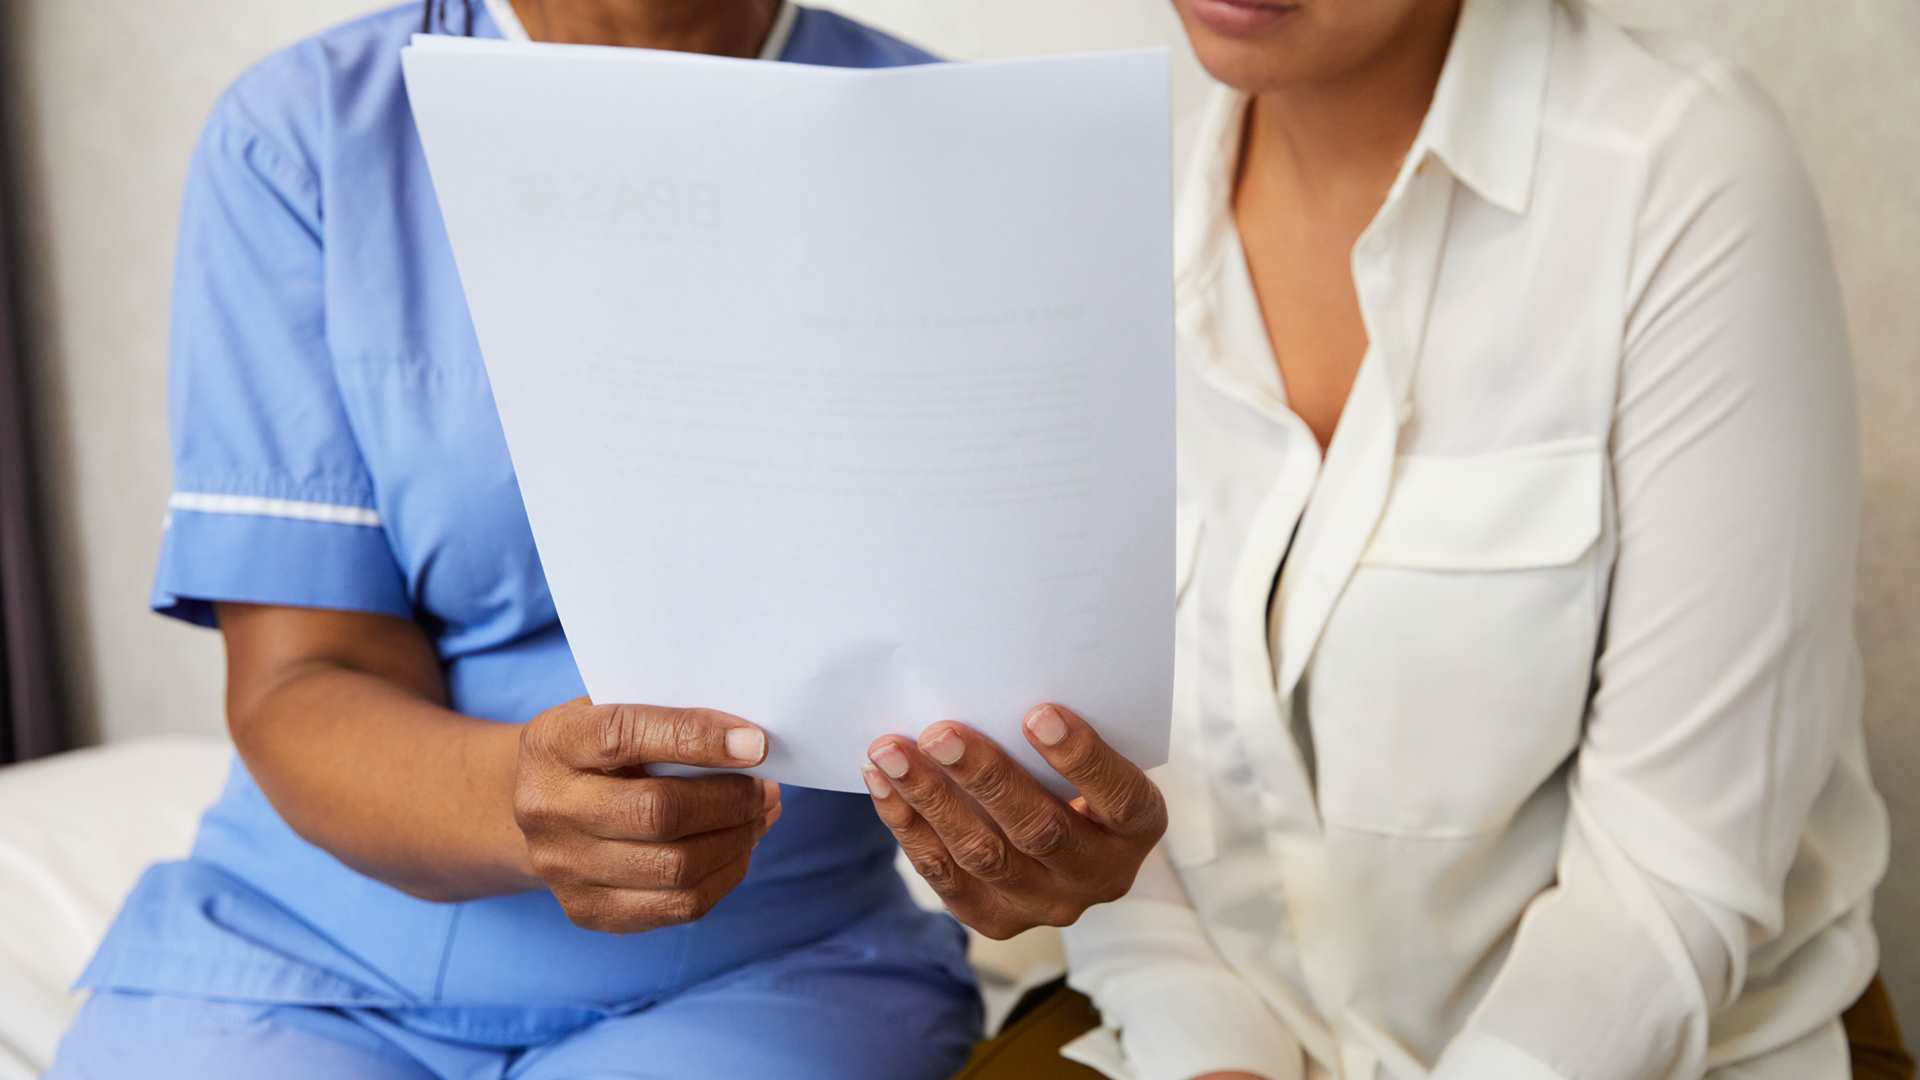 Midwife with patient reviewing documentation